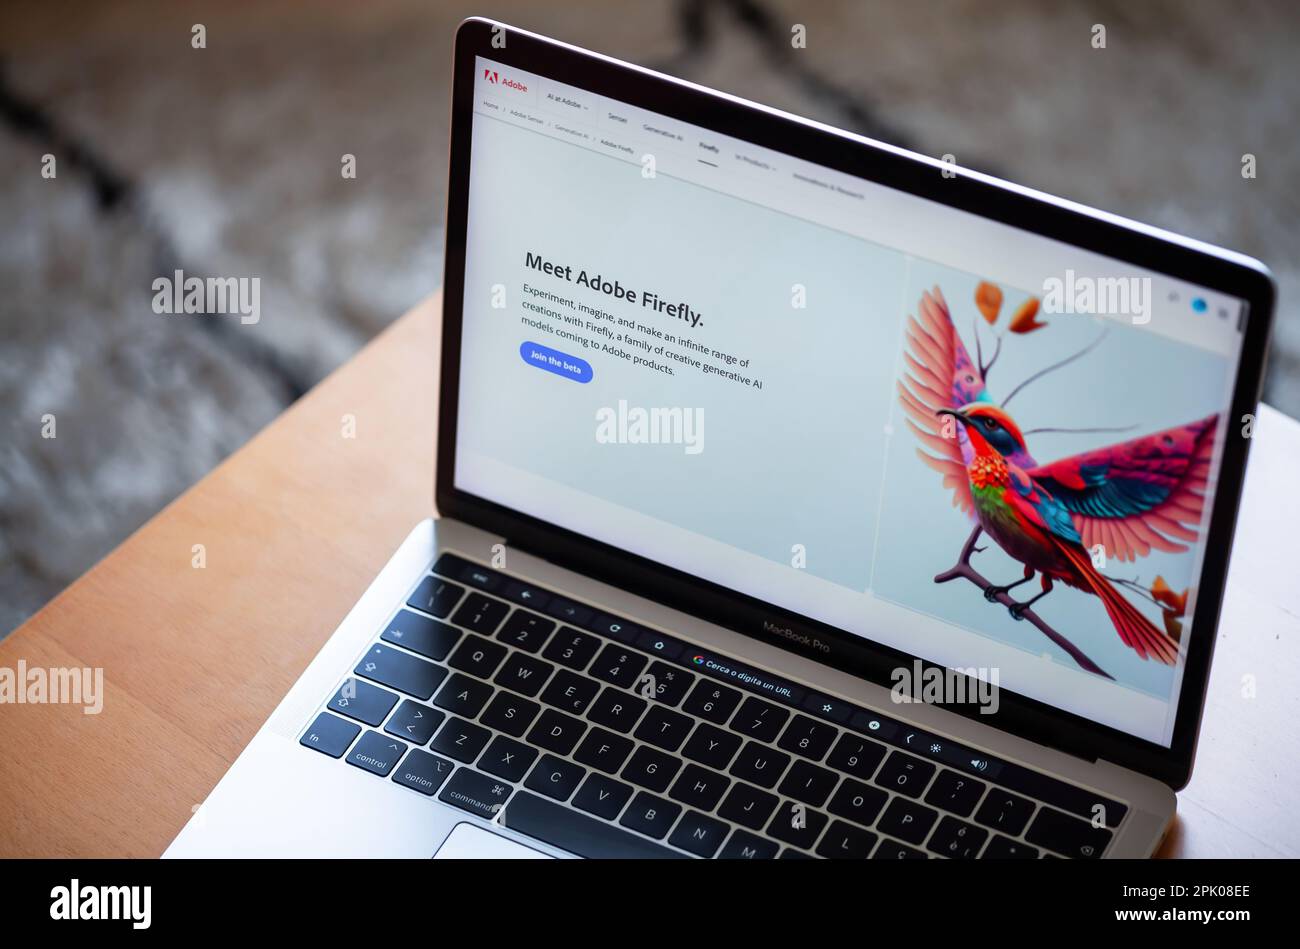 ITALY - April 4, 2023: Adobe Firefly website displayed on mac laptop screen. Adobe has announced the beta release of its AI Art Generator tool. Stock Photo